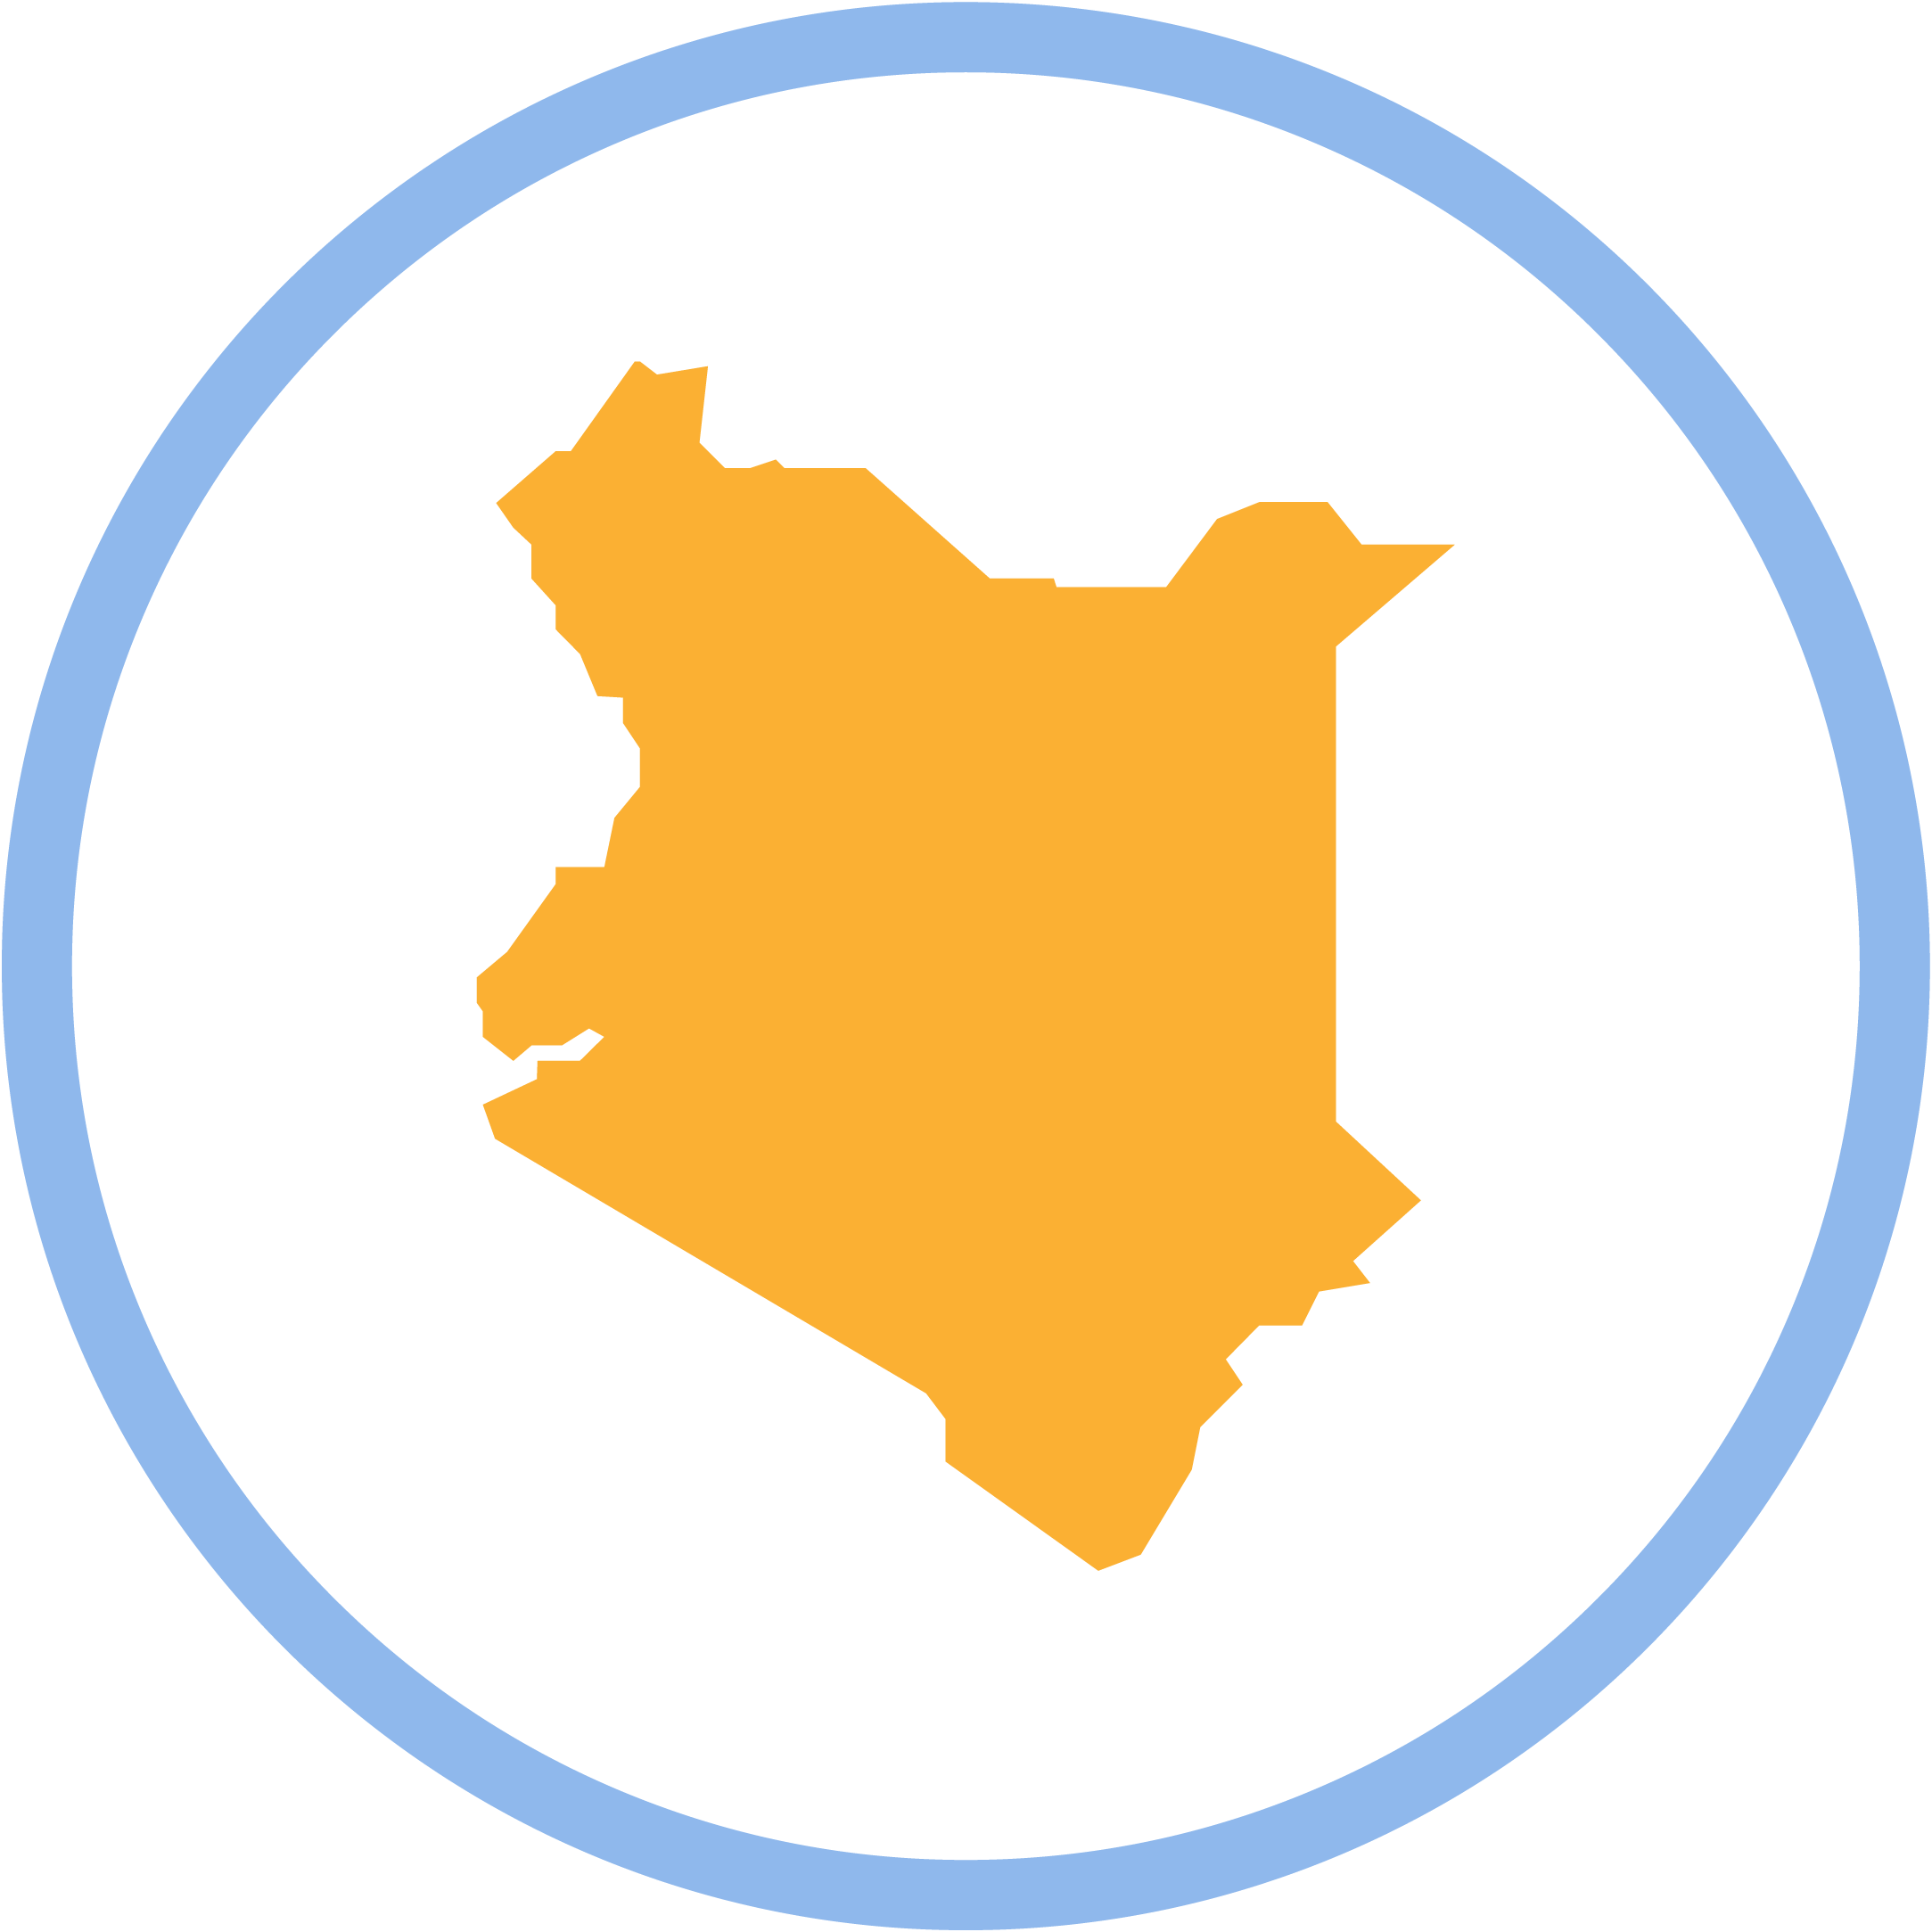 icon containing outline of the country of Kenya